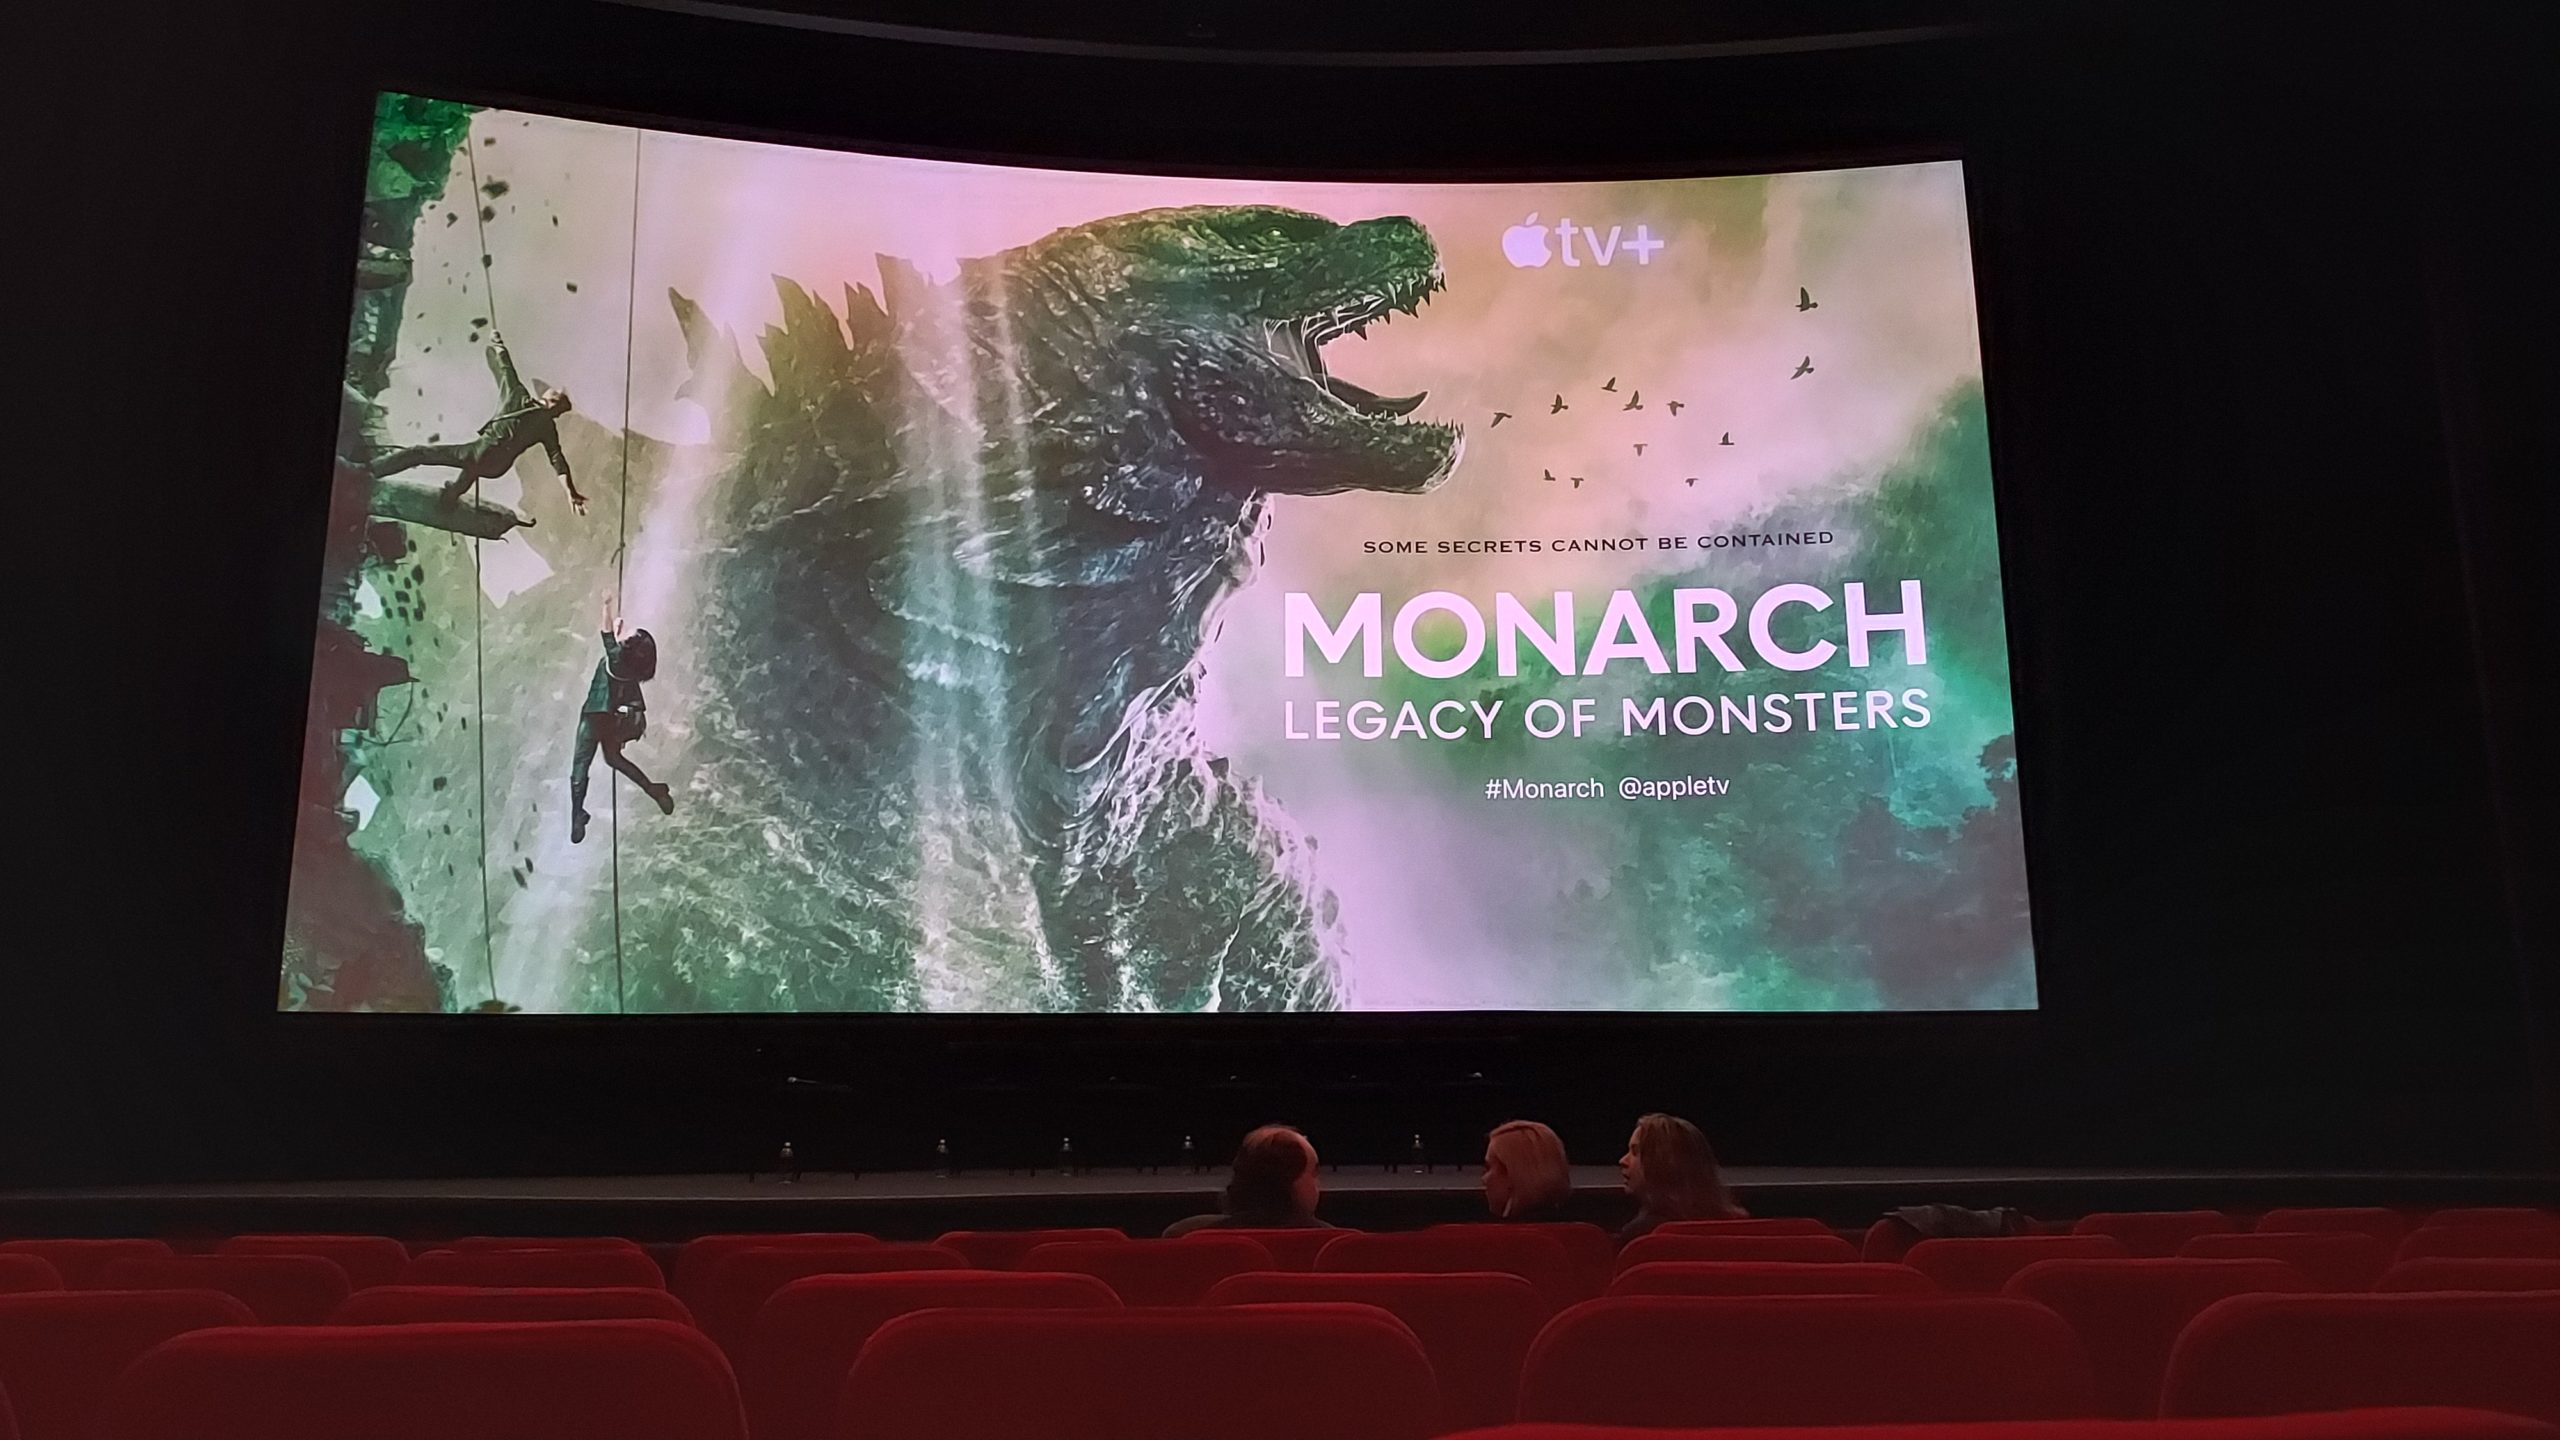 Attending the MONARCH Screening + Q&A at the DGA!